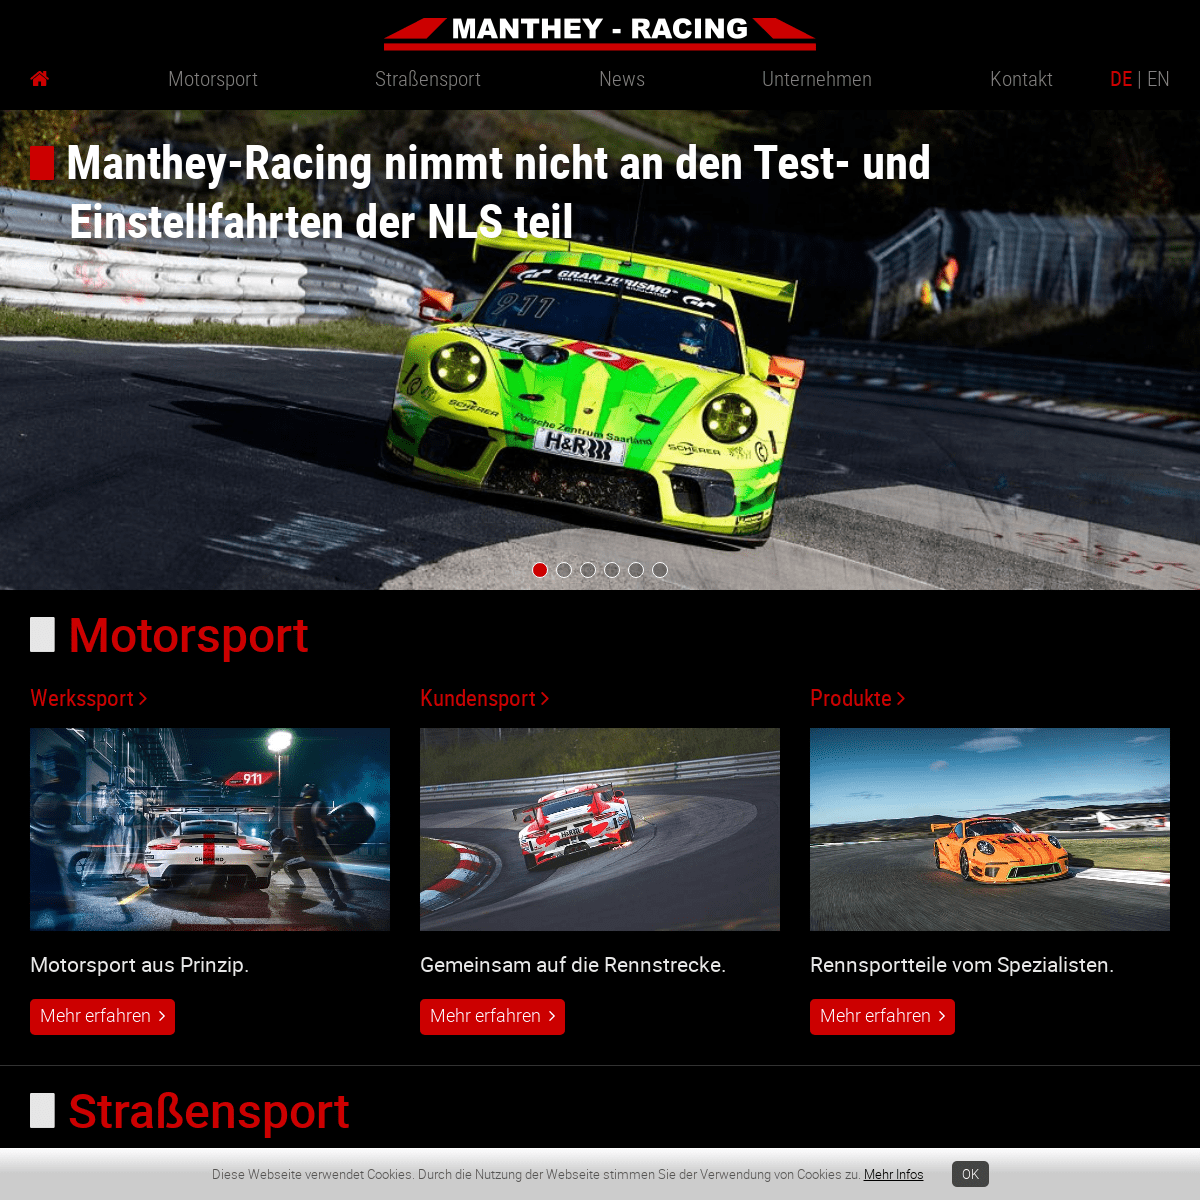 A complete backup of manthey-racing.de